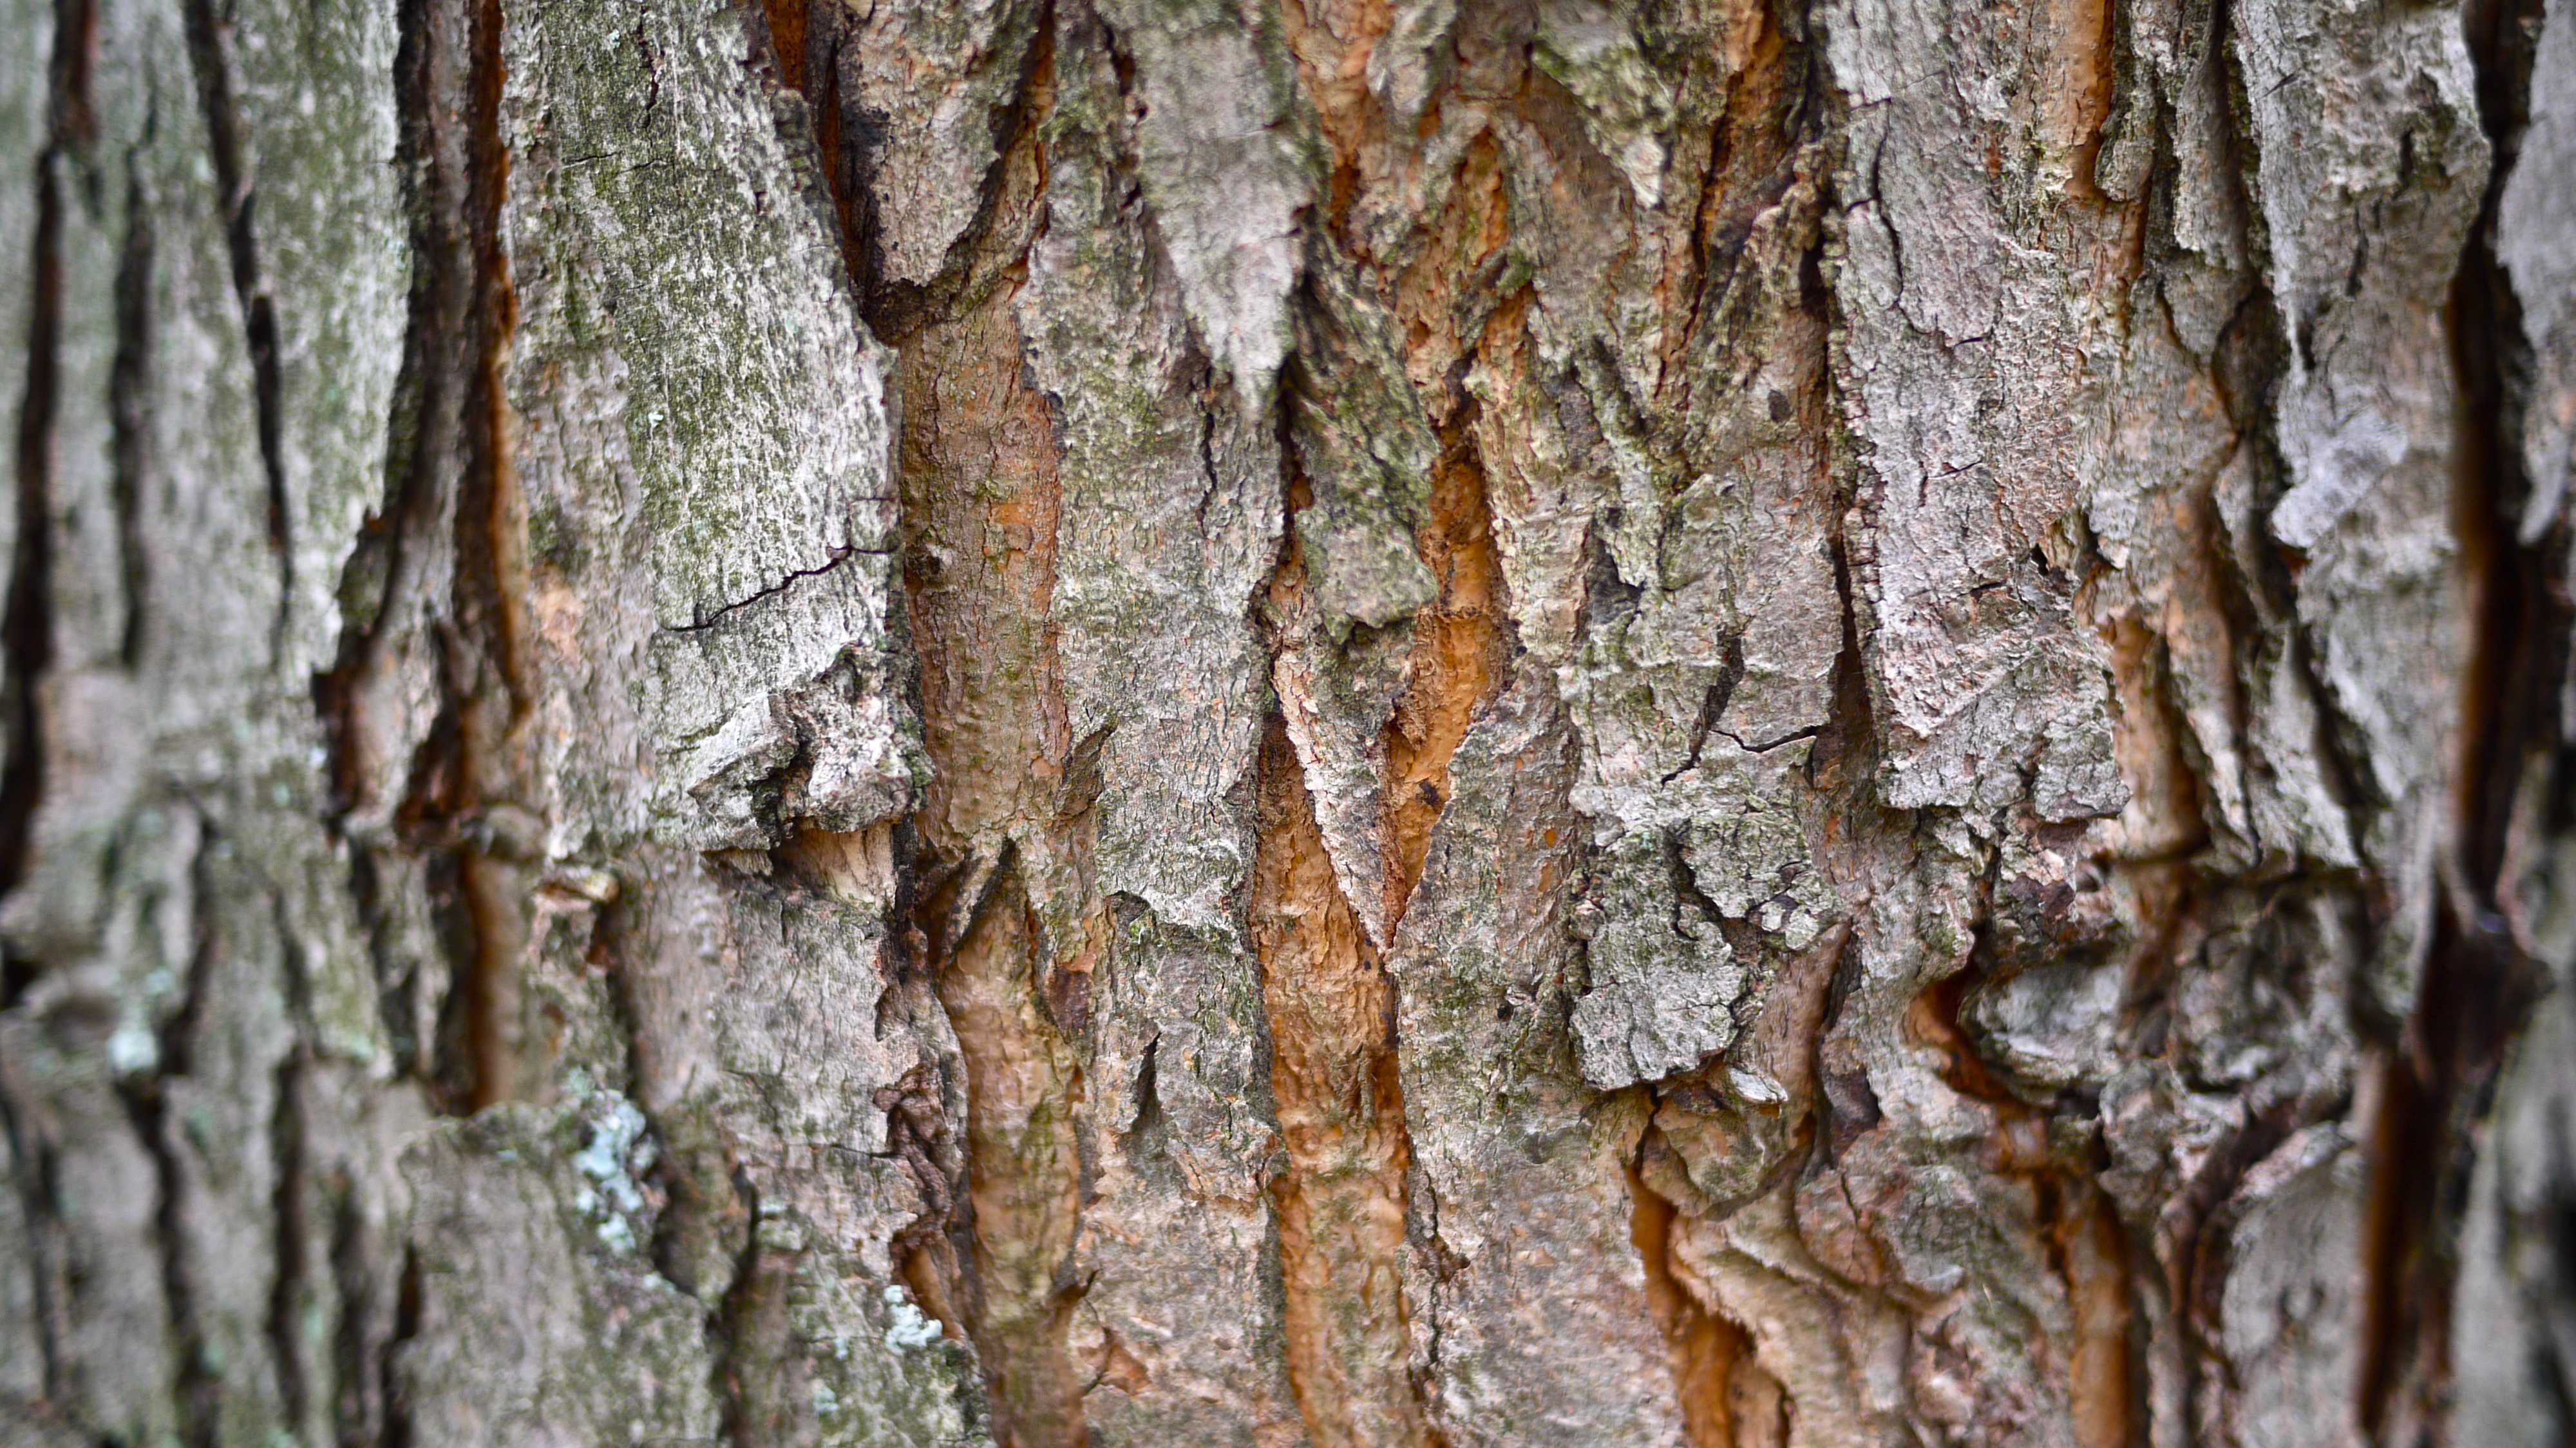 Tree bark texture background | No cost royalty free stock